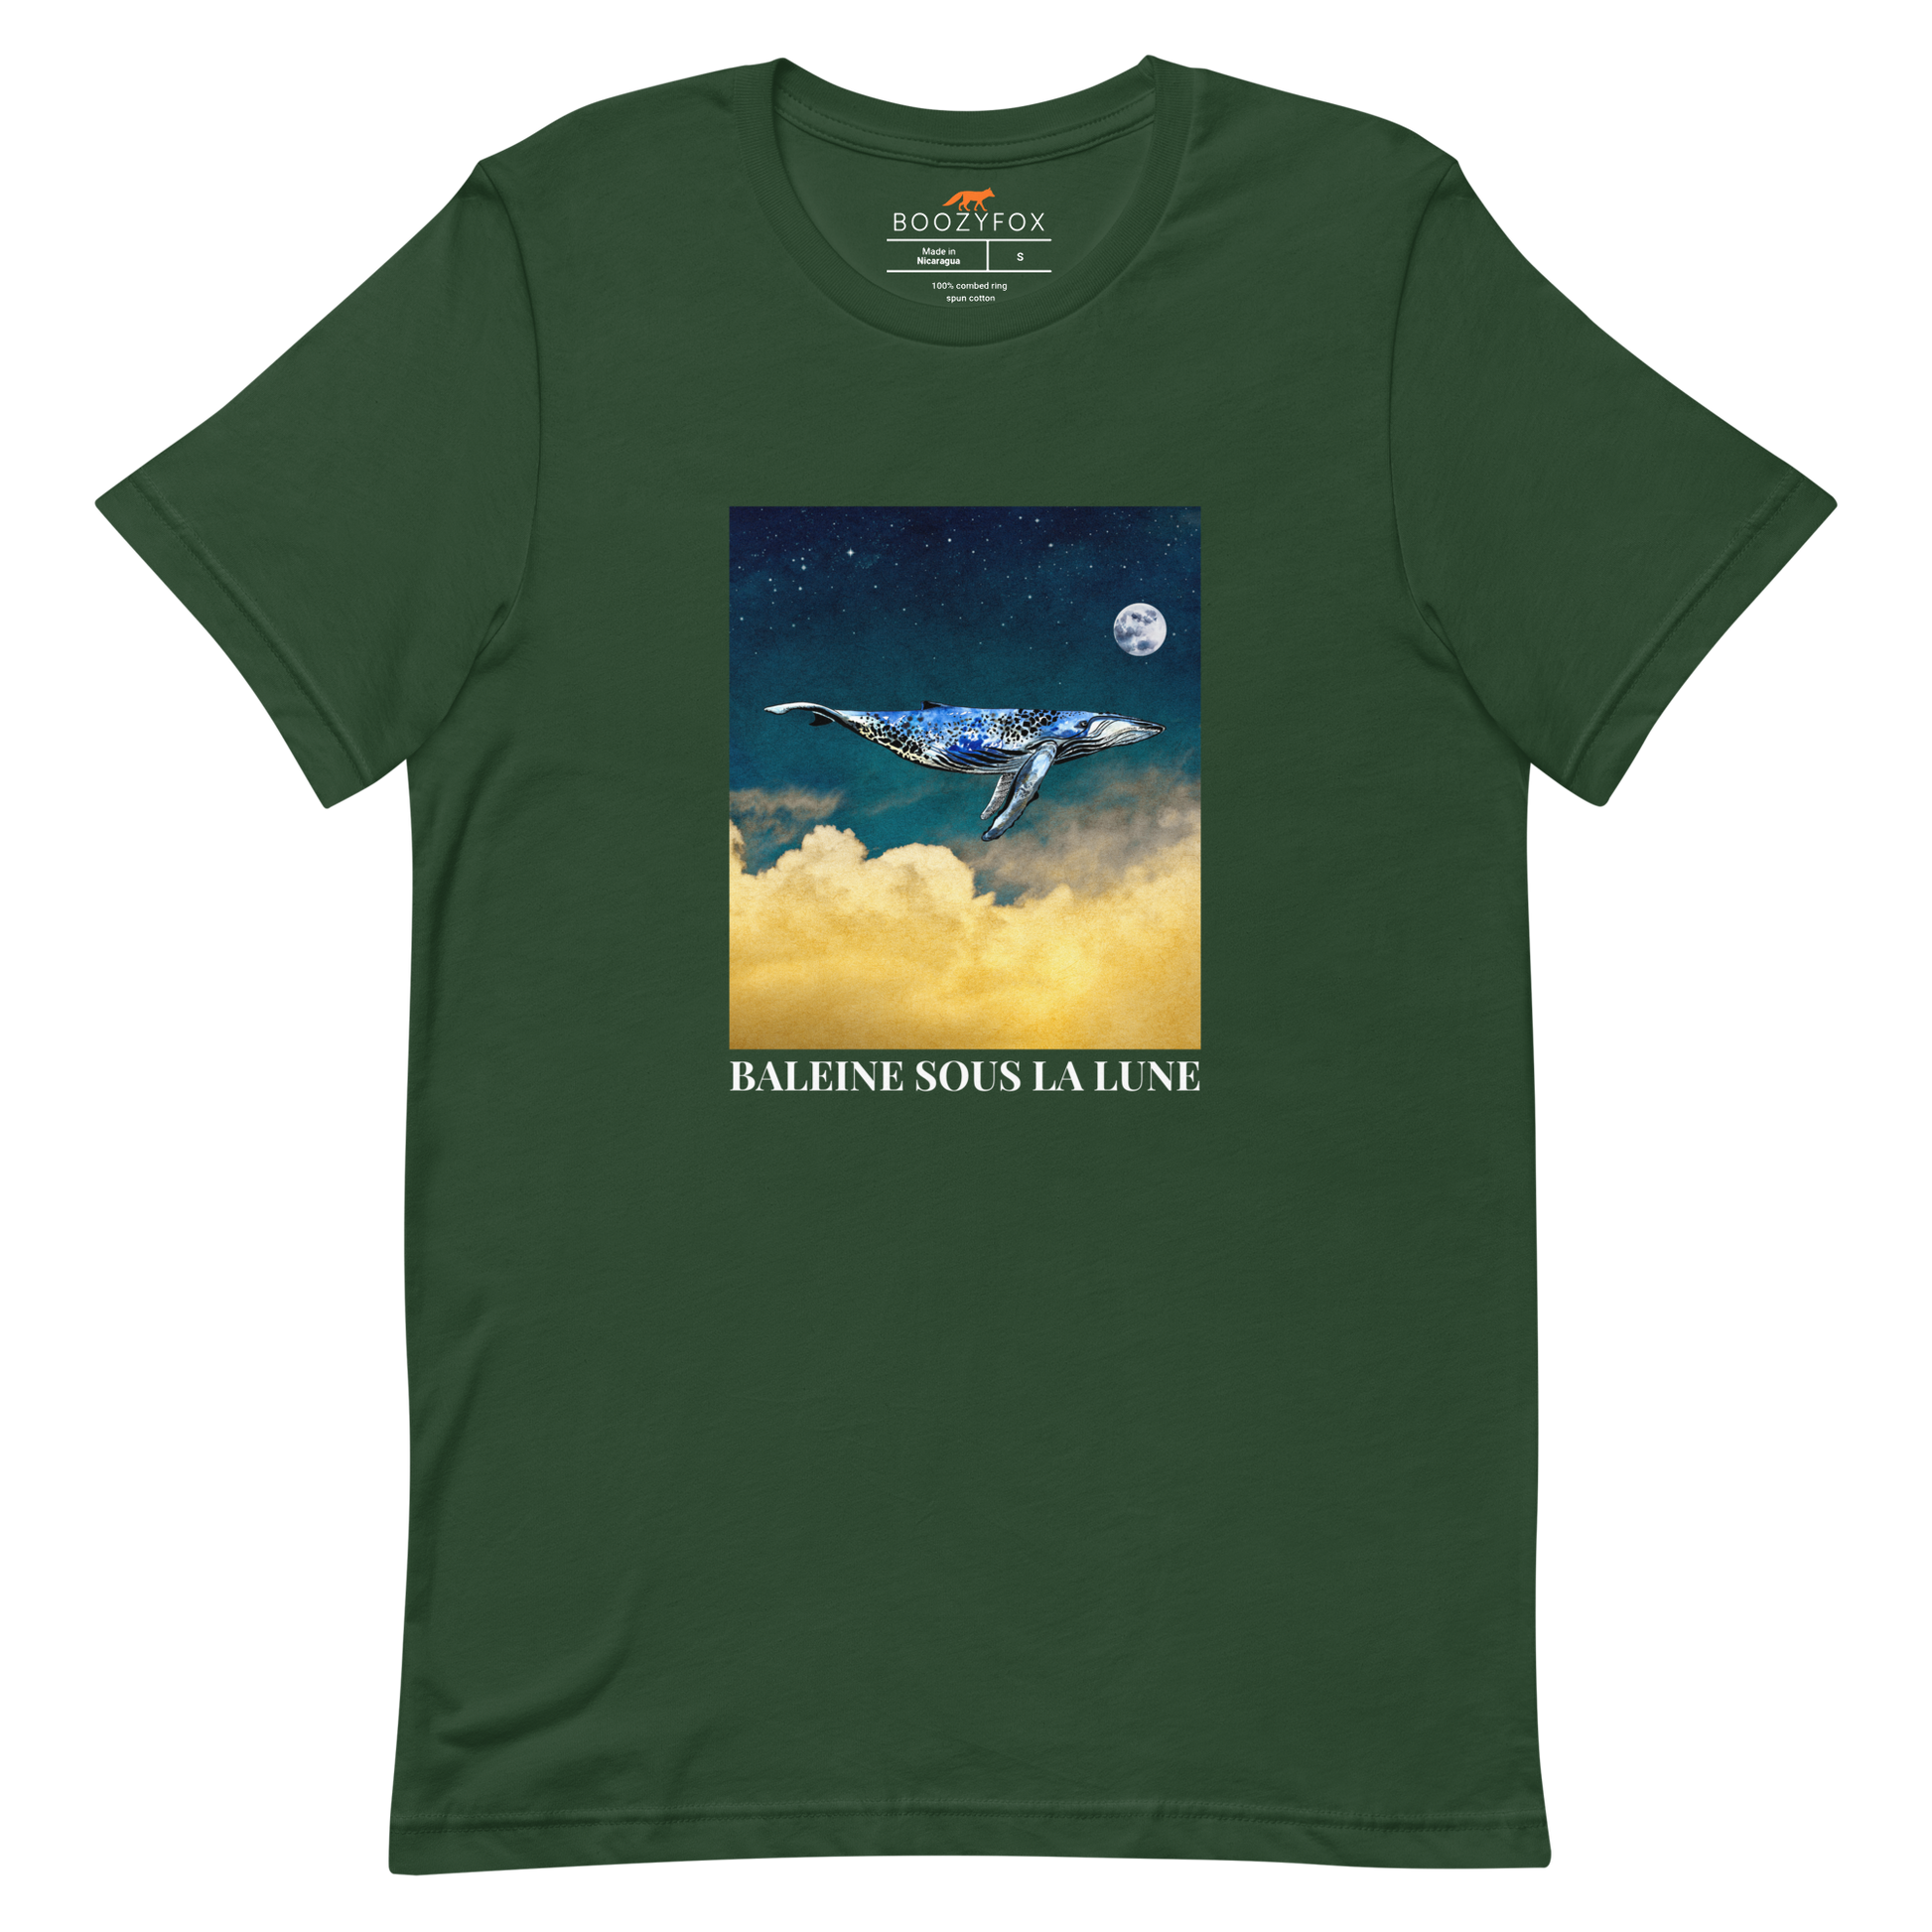 Forest Green Premium Whale T-Shirt featuring a majestic Whale Under The Moon graphic on the chest - Cool Graphic Whale Tees - Boozy Fox